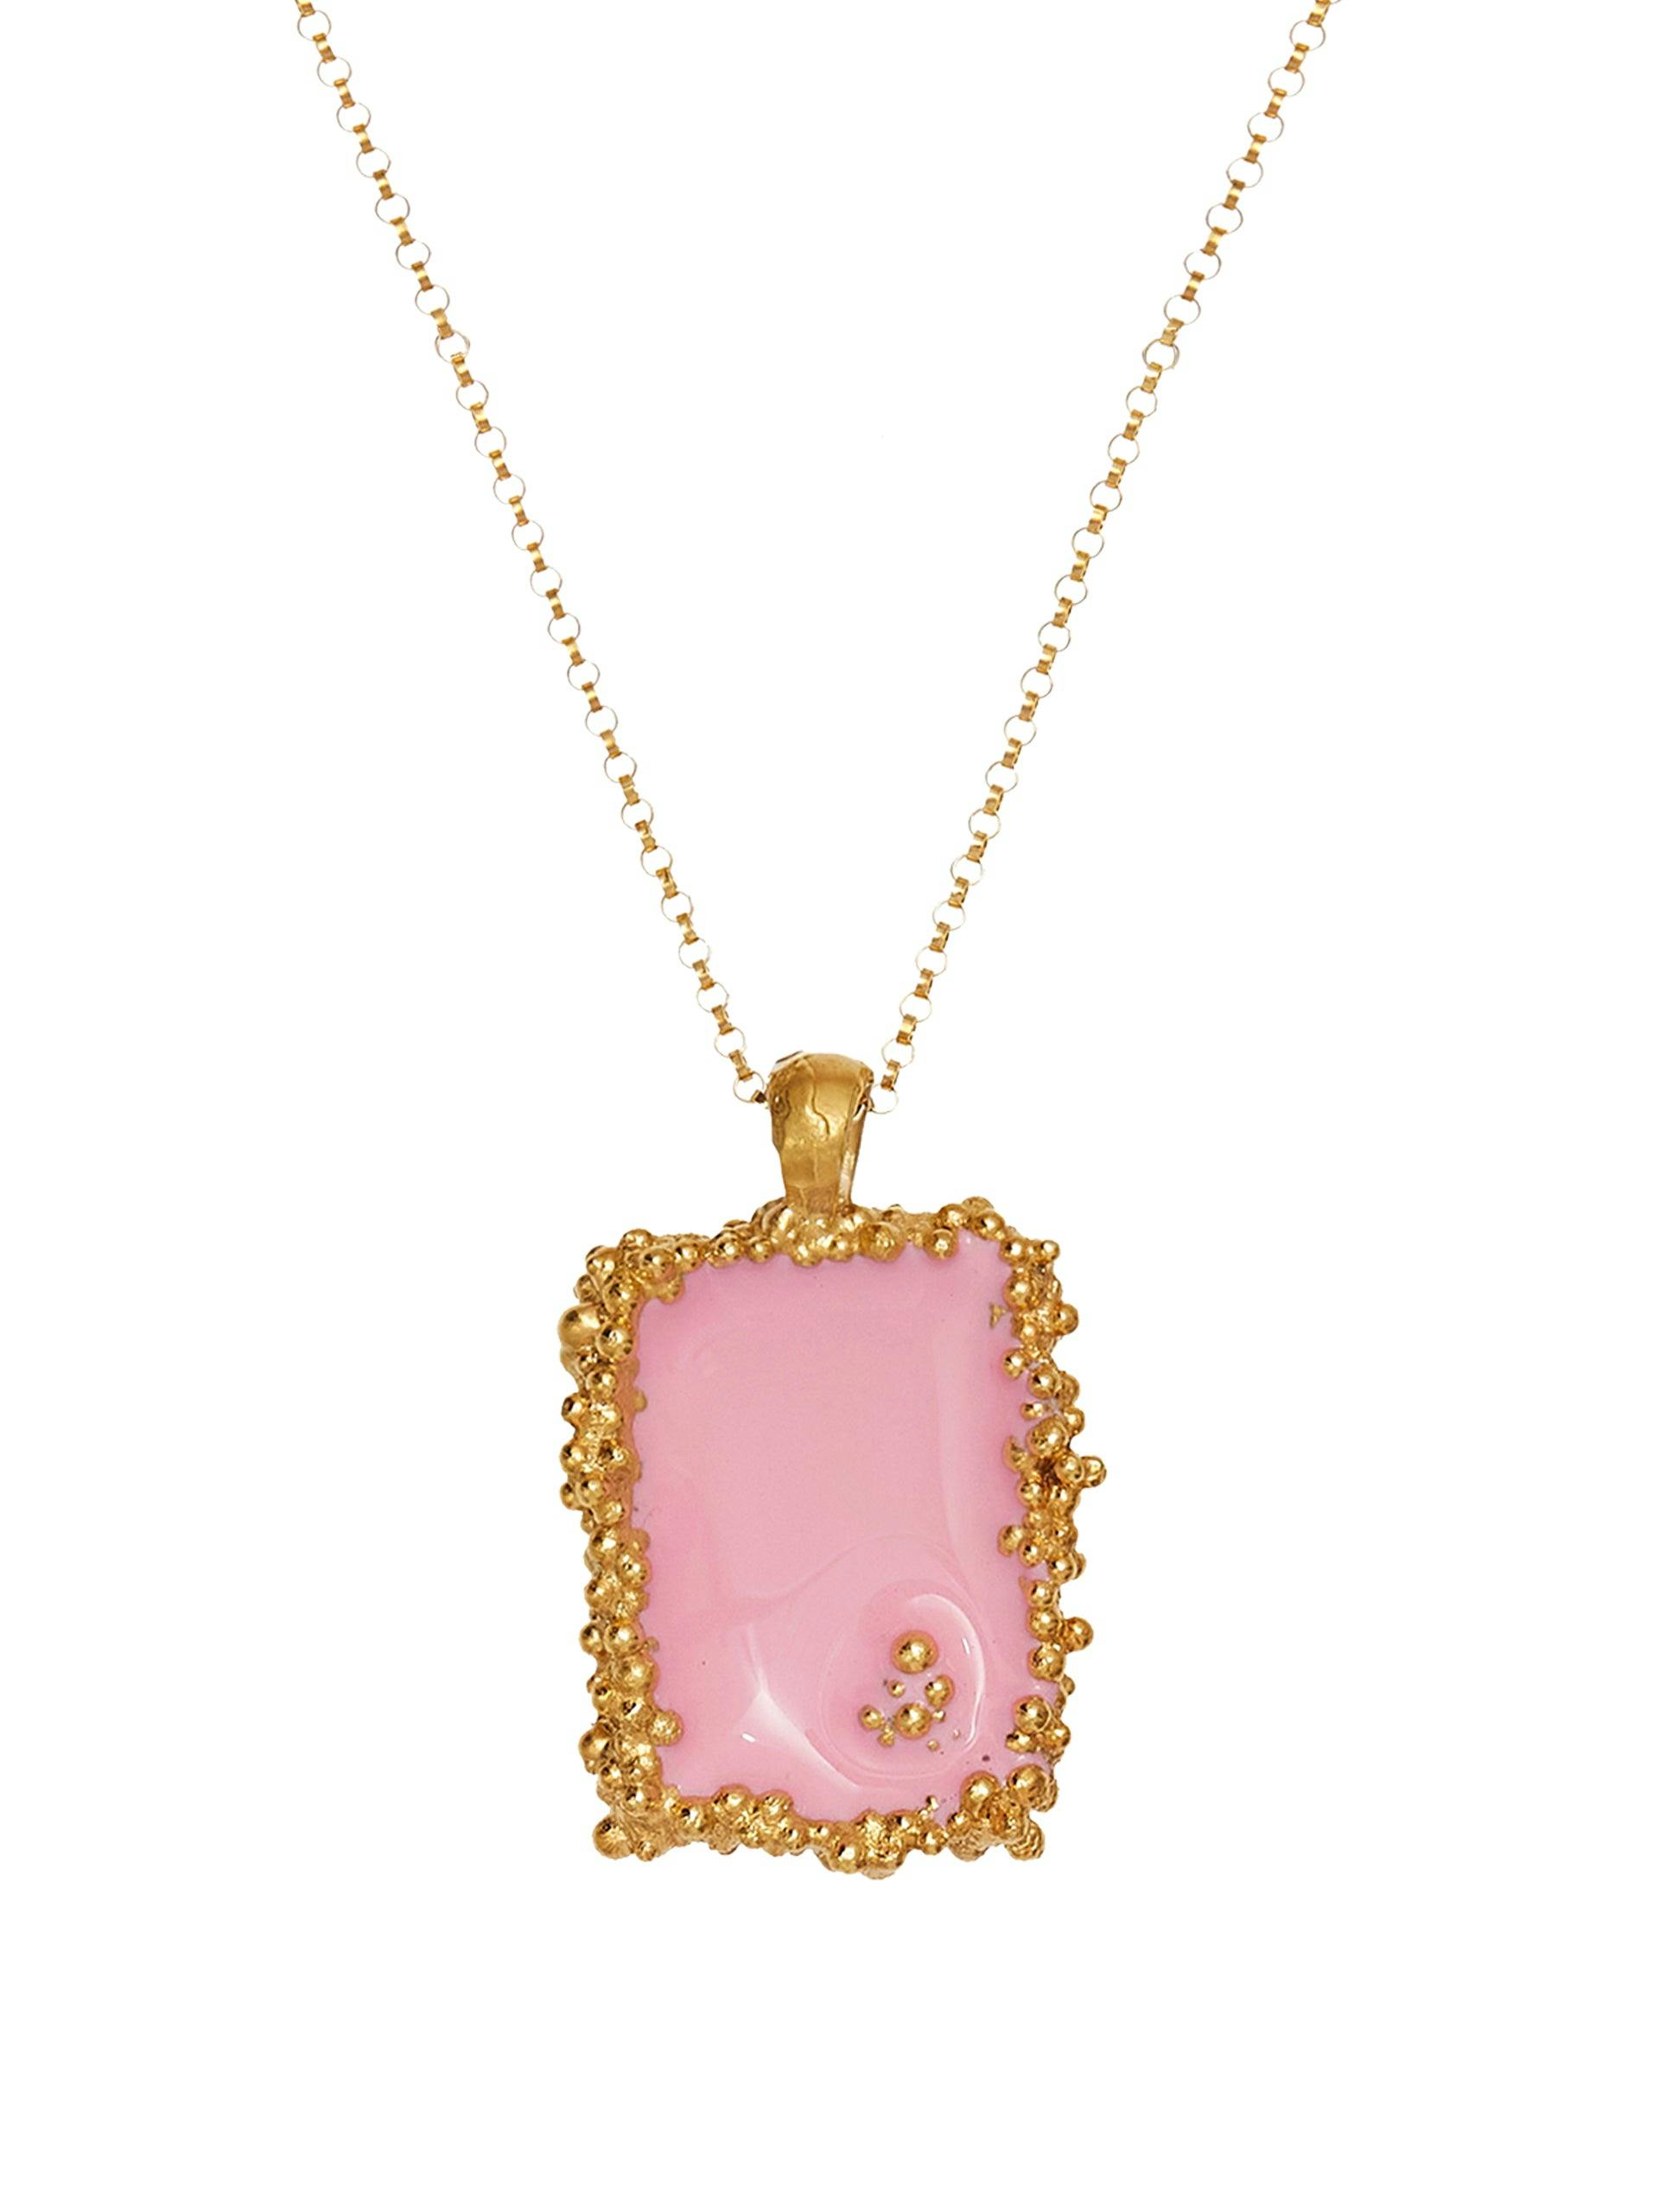 Pink and gold Sun-faded Fresco Vignette necklace